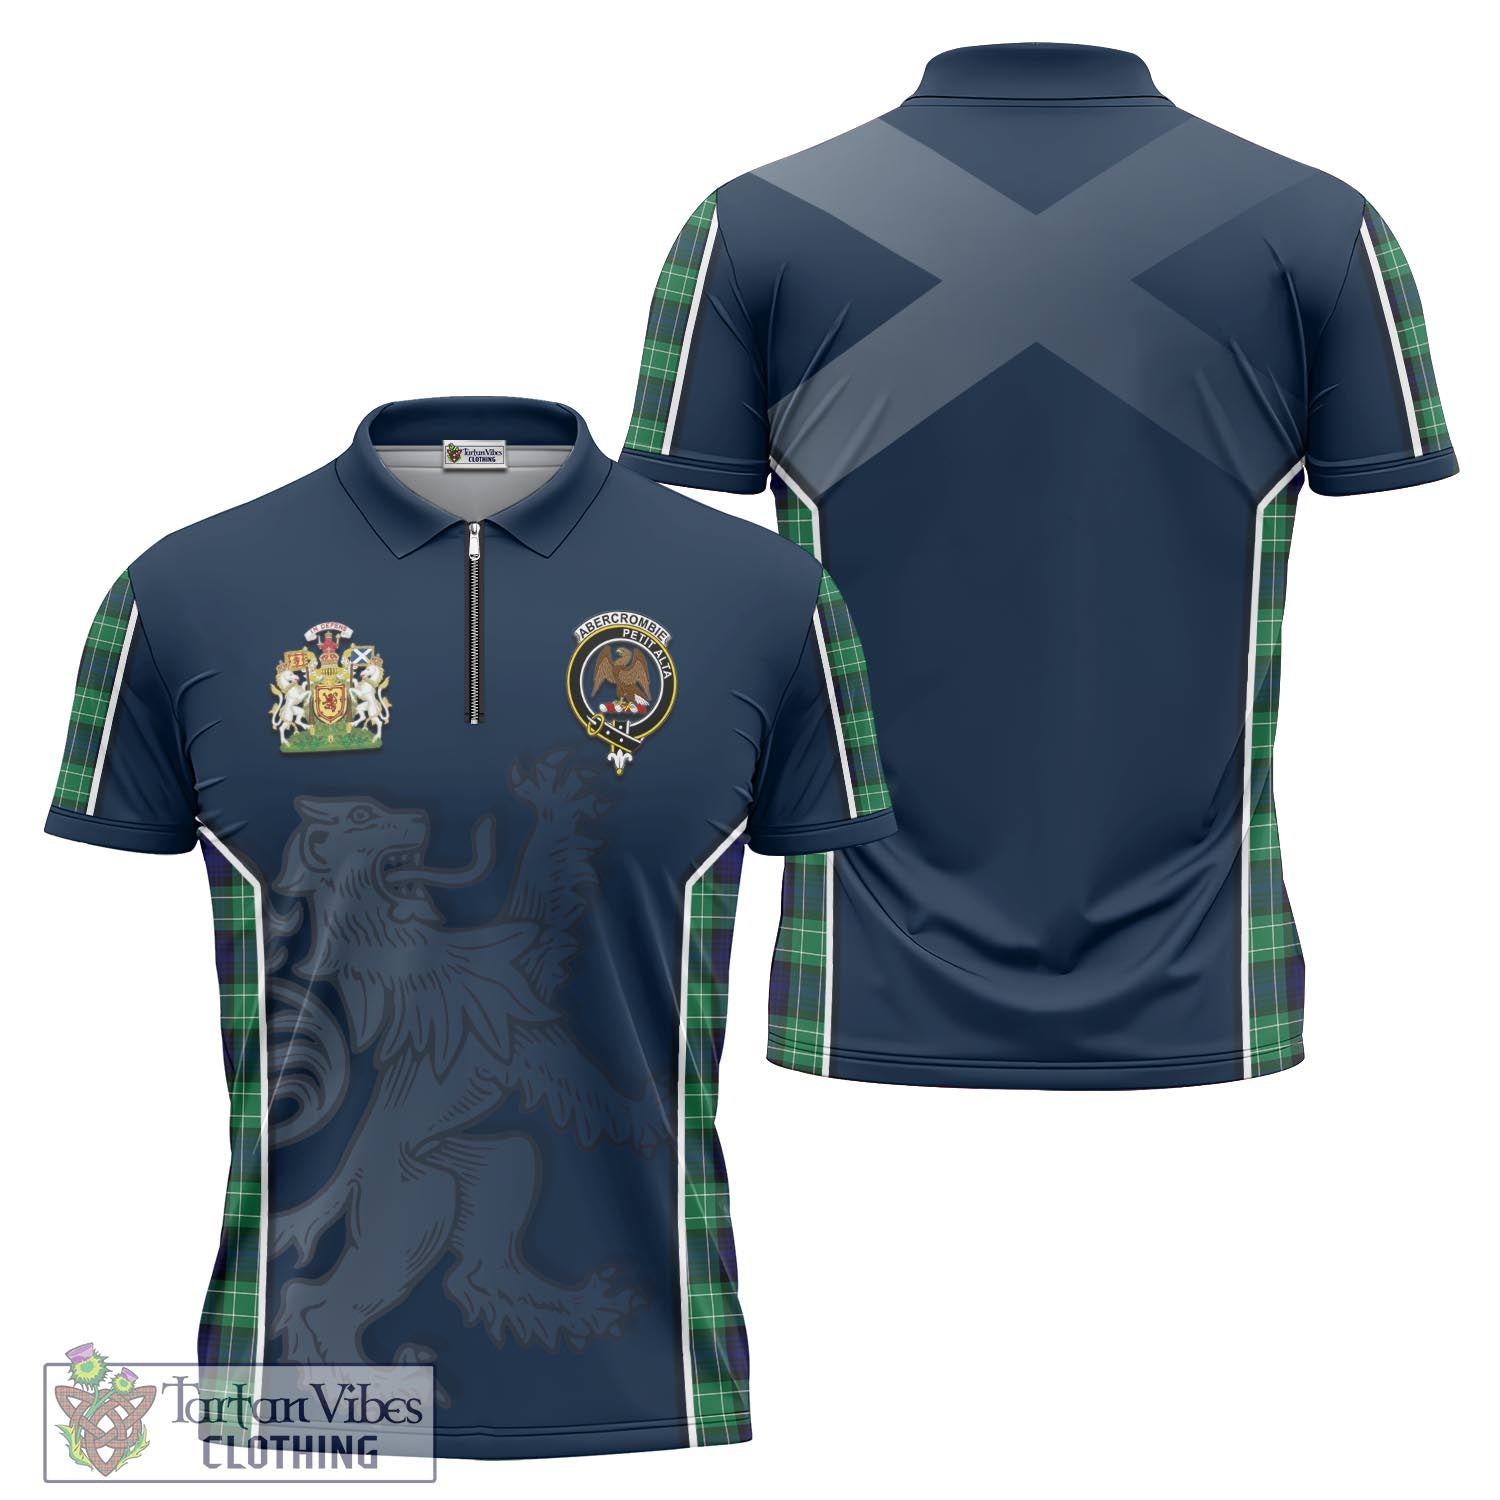 Tartan Vibes Clothing Abercrombie Tartan Zipper Polo Shirt with Family Crest and Lion Rampant Vibes Sport Style